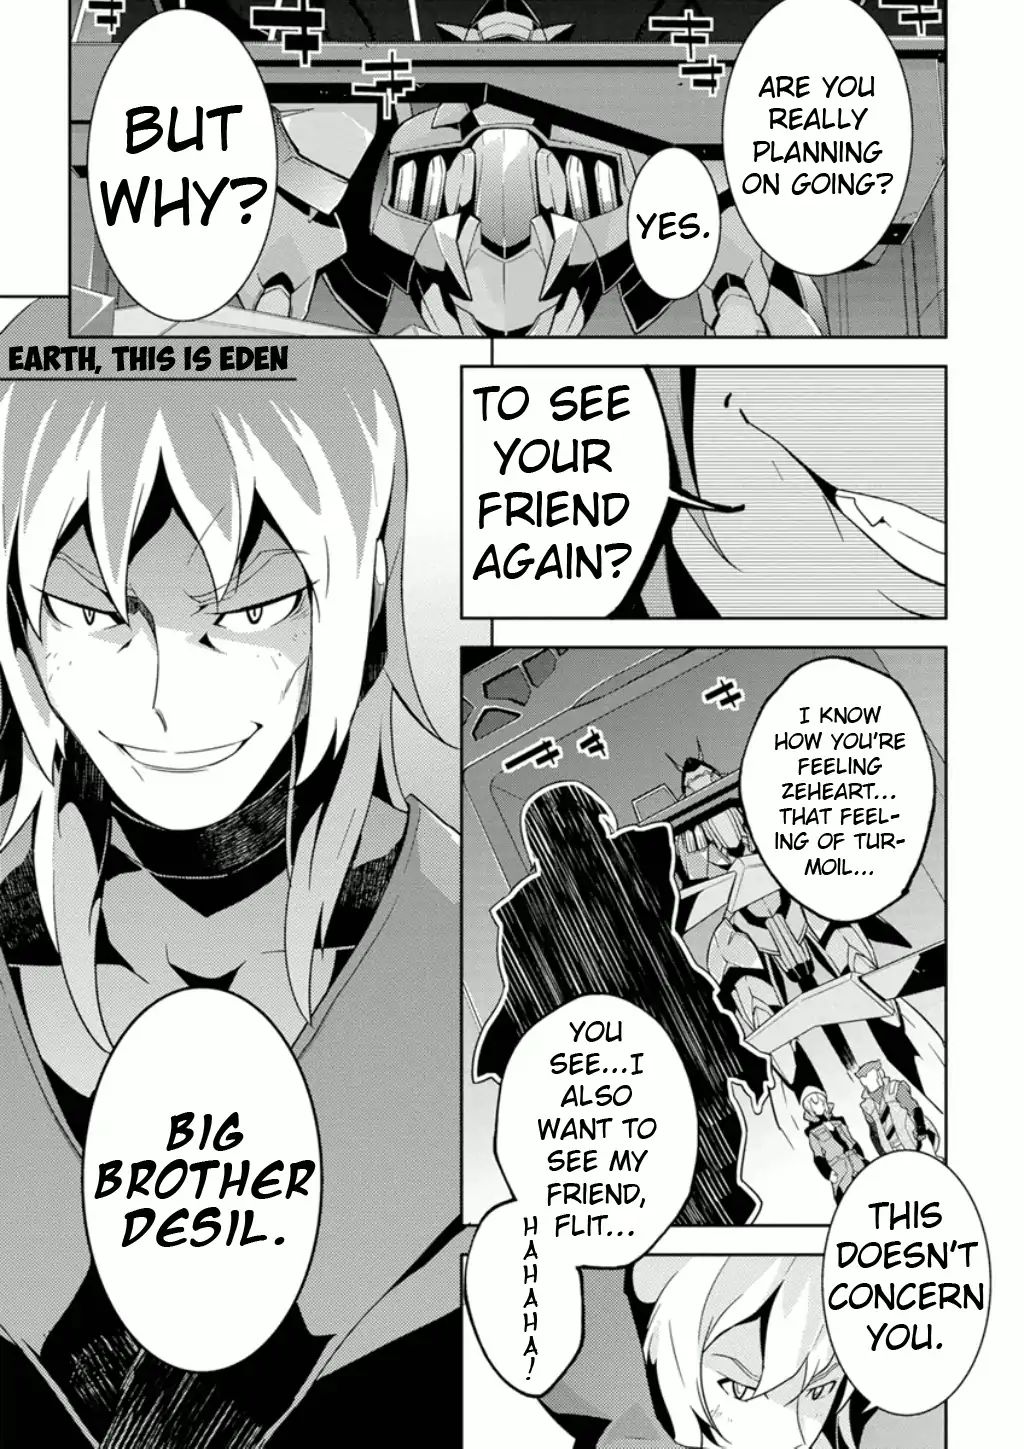 Mobile Suit Gundam Age - Second Evolution Vol.2 Chapter 7: Earth, This Is Eden - Picture 2